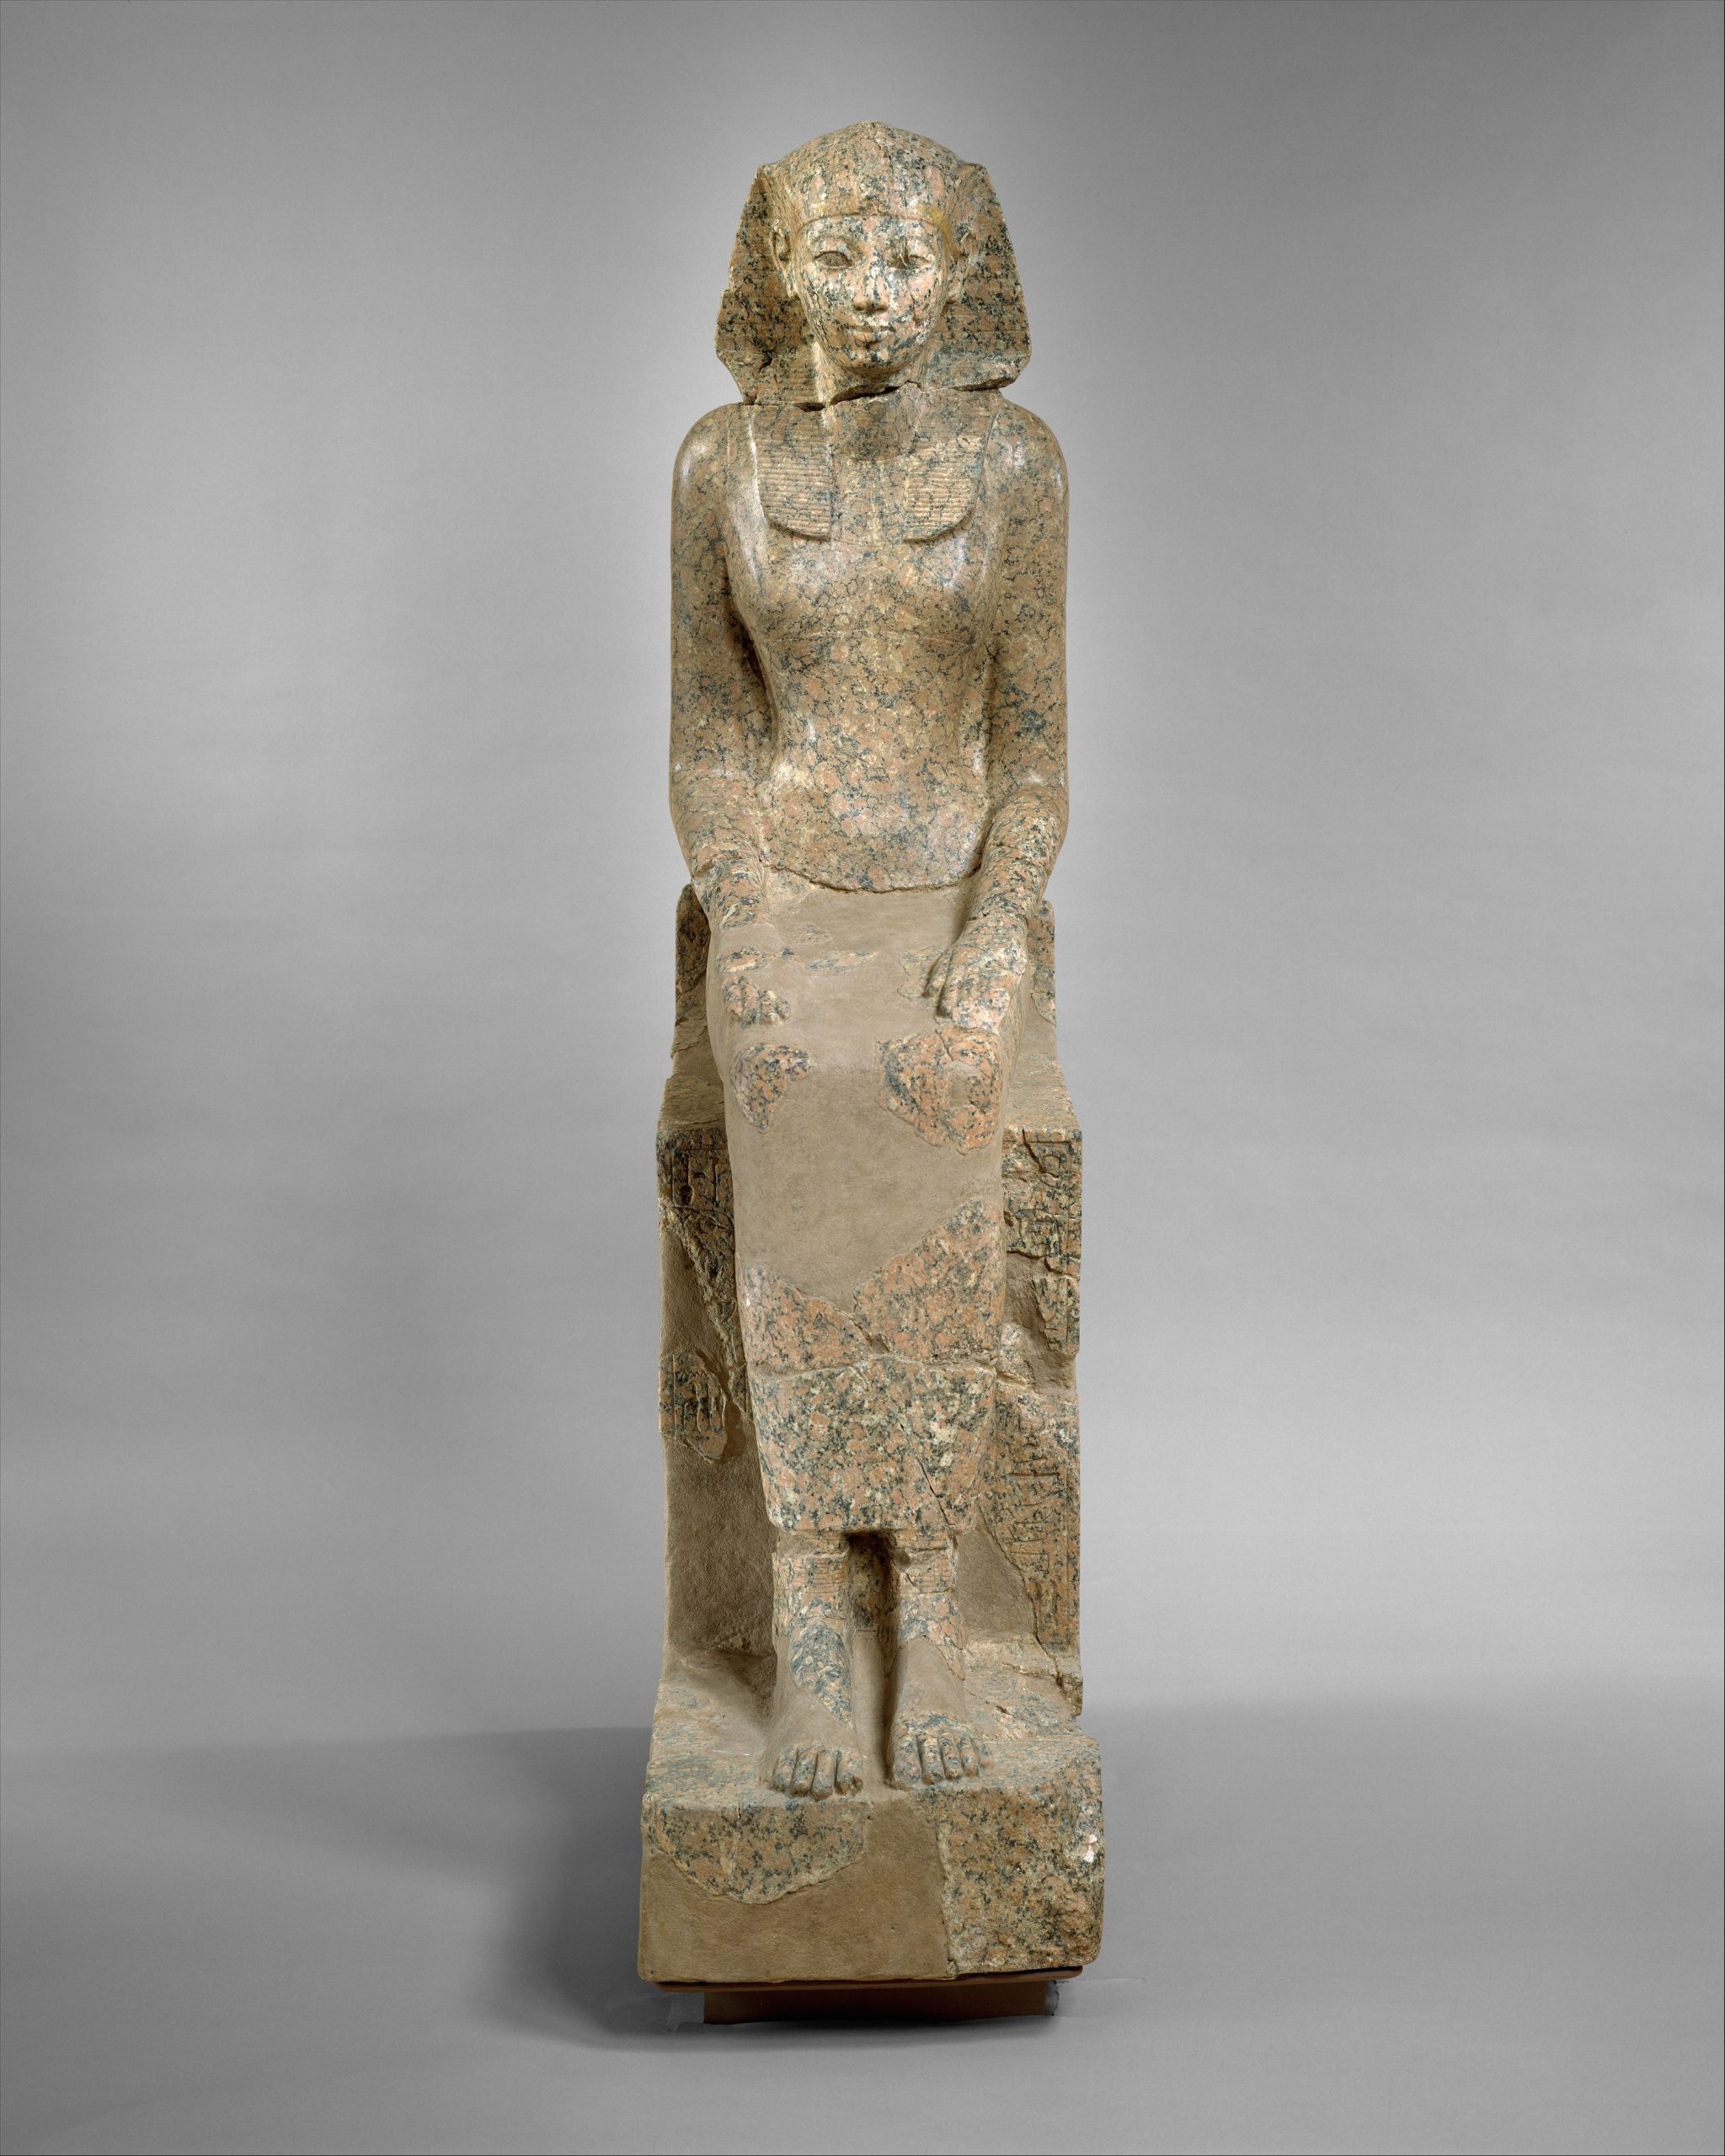 Vertical statue of a female pharaoh. The statue is beige in colour.